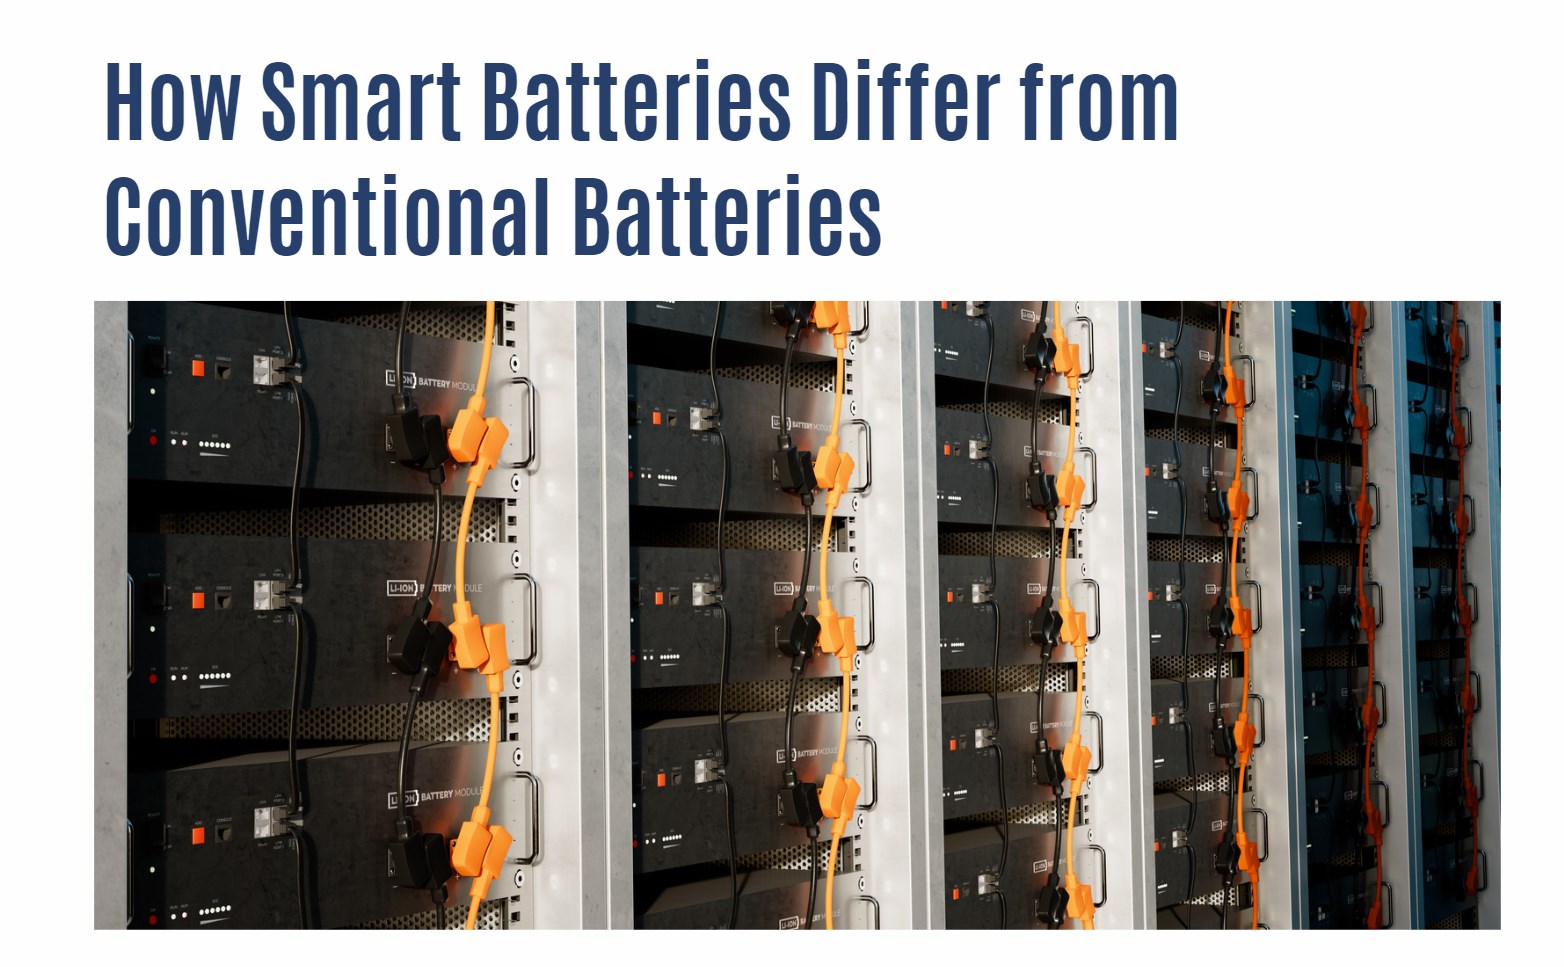 How Smart Batteries Differ from Conventional Batteries